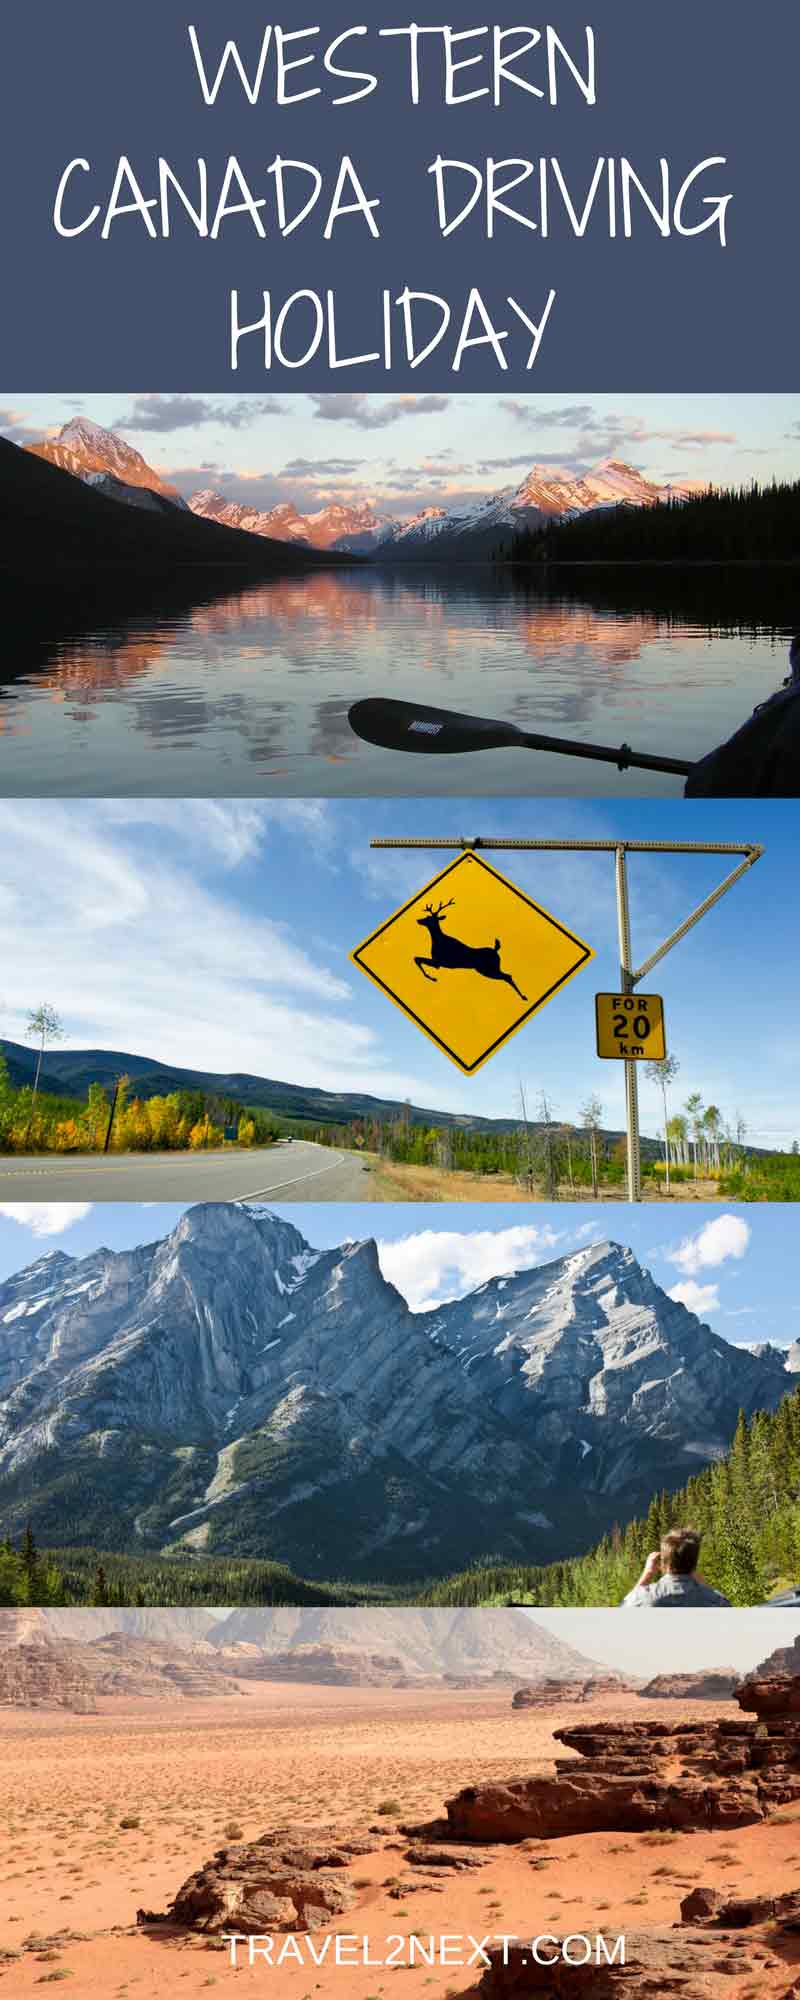 Western Canada Driving Holiday